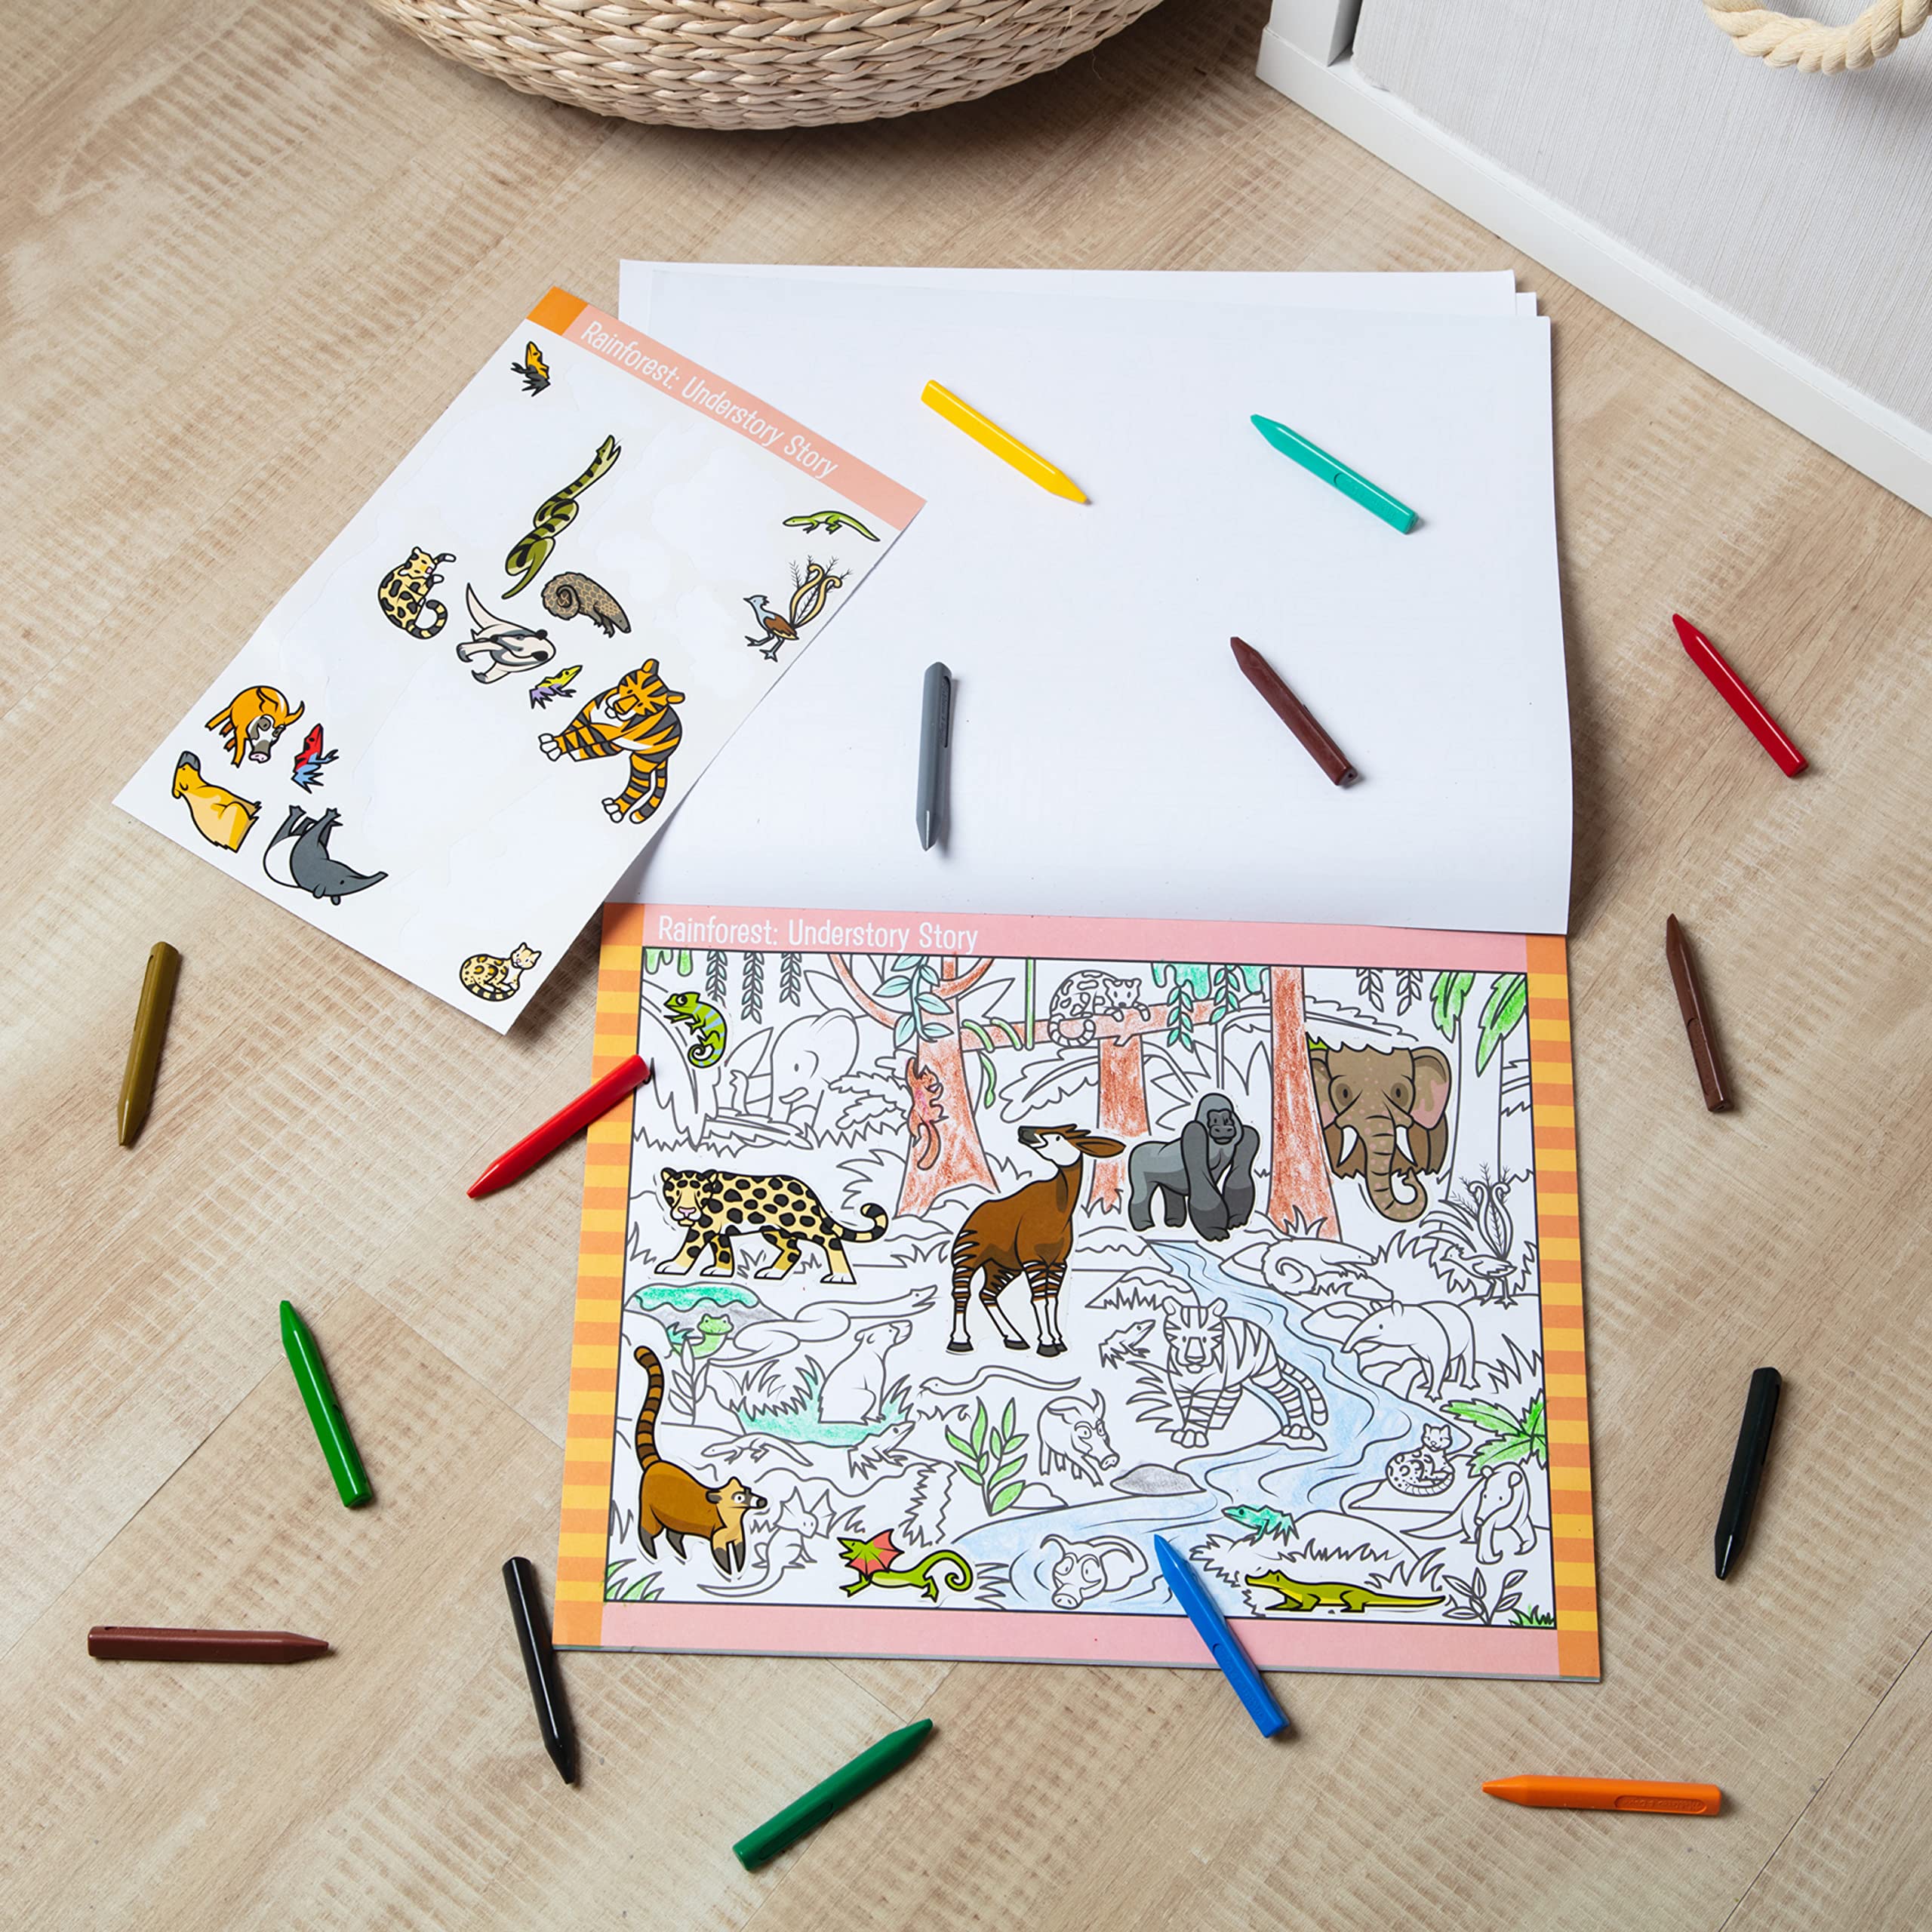 Melissa & Doug Seek and Find Sticker Pad, Animals (400+ Stickers, 14 Scenes to Color) - Search And Find Sticker Pads, Arts And Crafts Activity For Kids Ages 4+ - FSC-Certified Materials